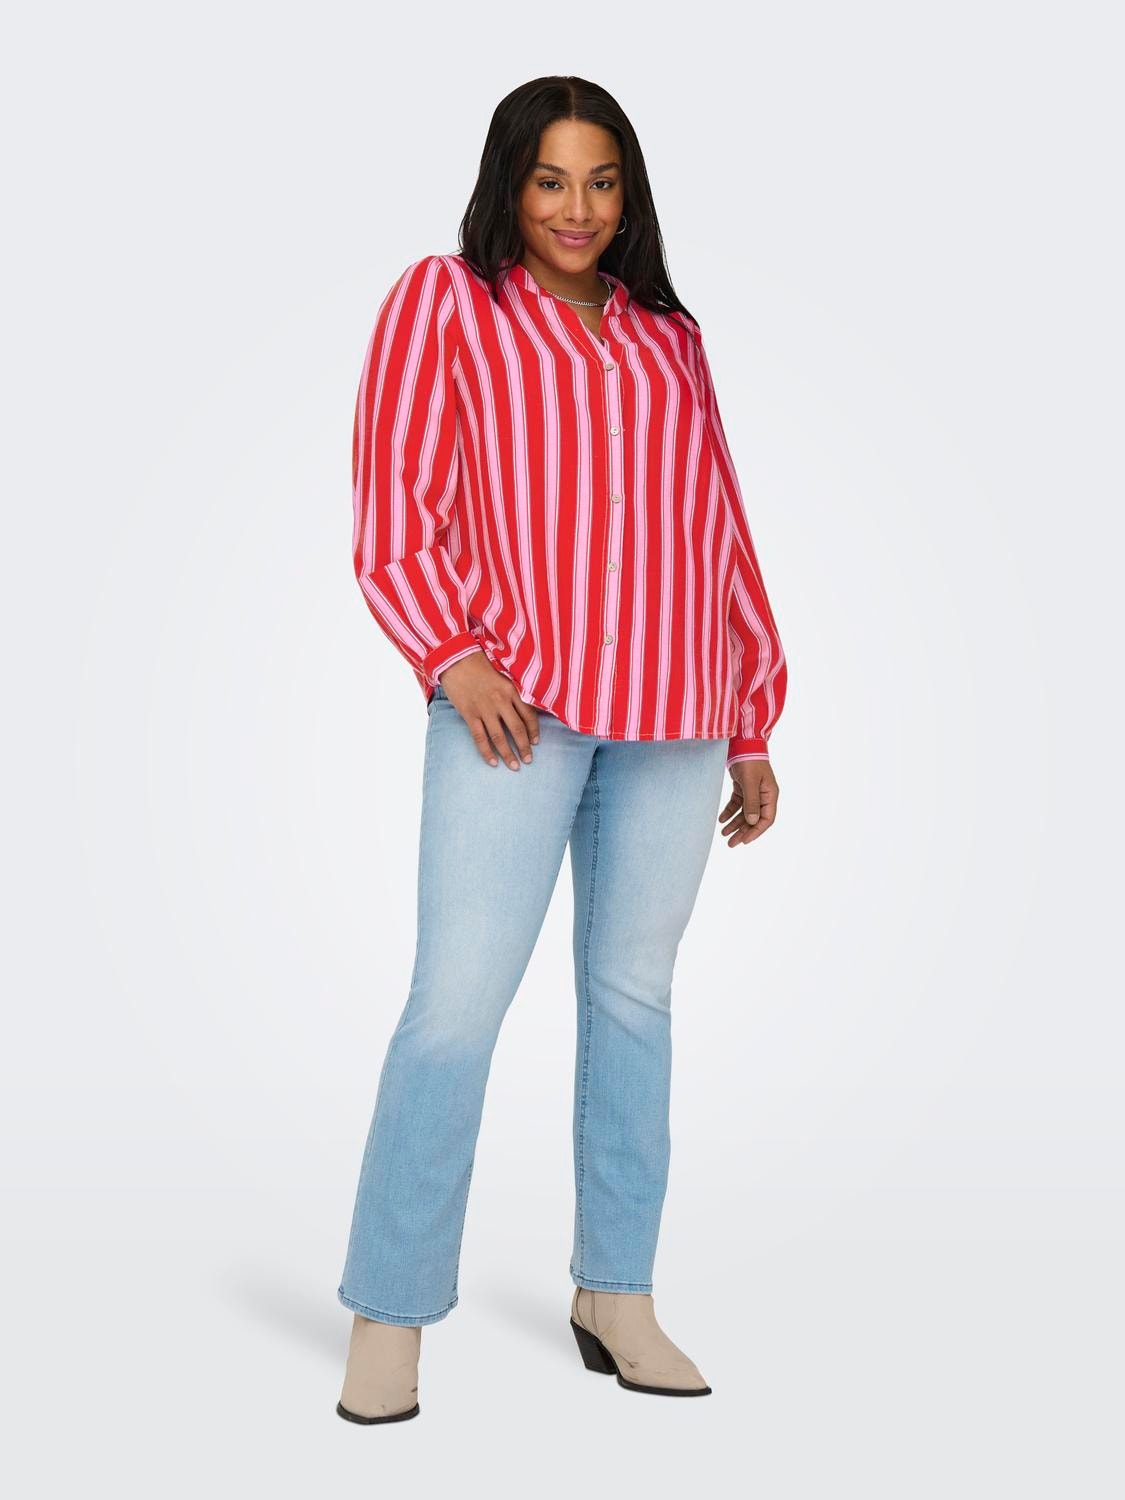 ONLY Curvy shirt -Flame Scarlet - 15315807